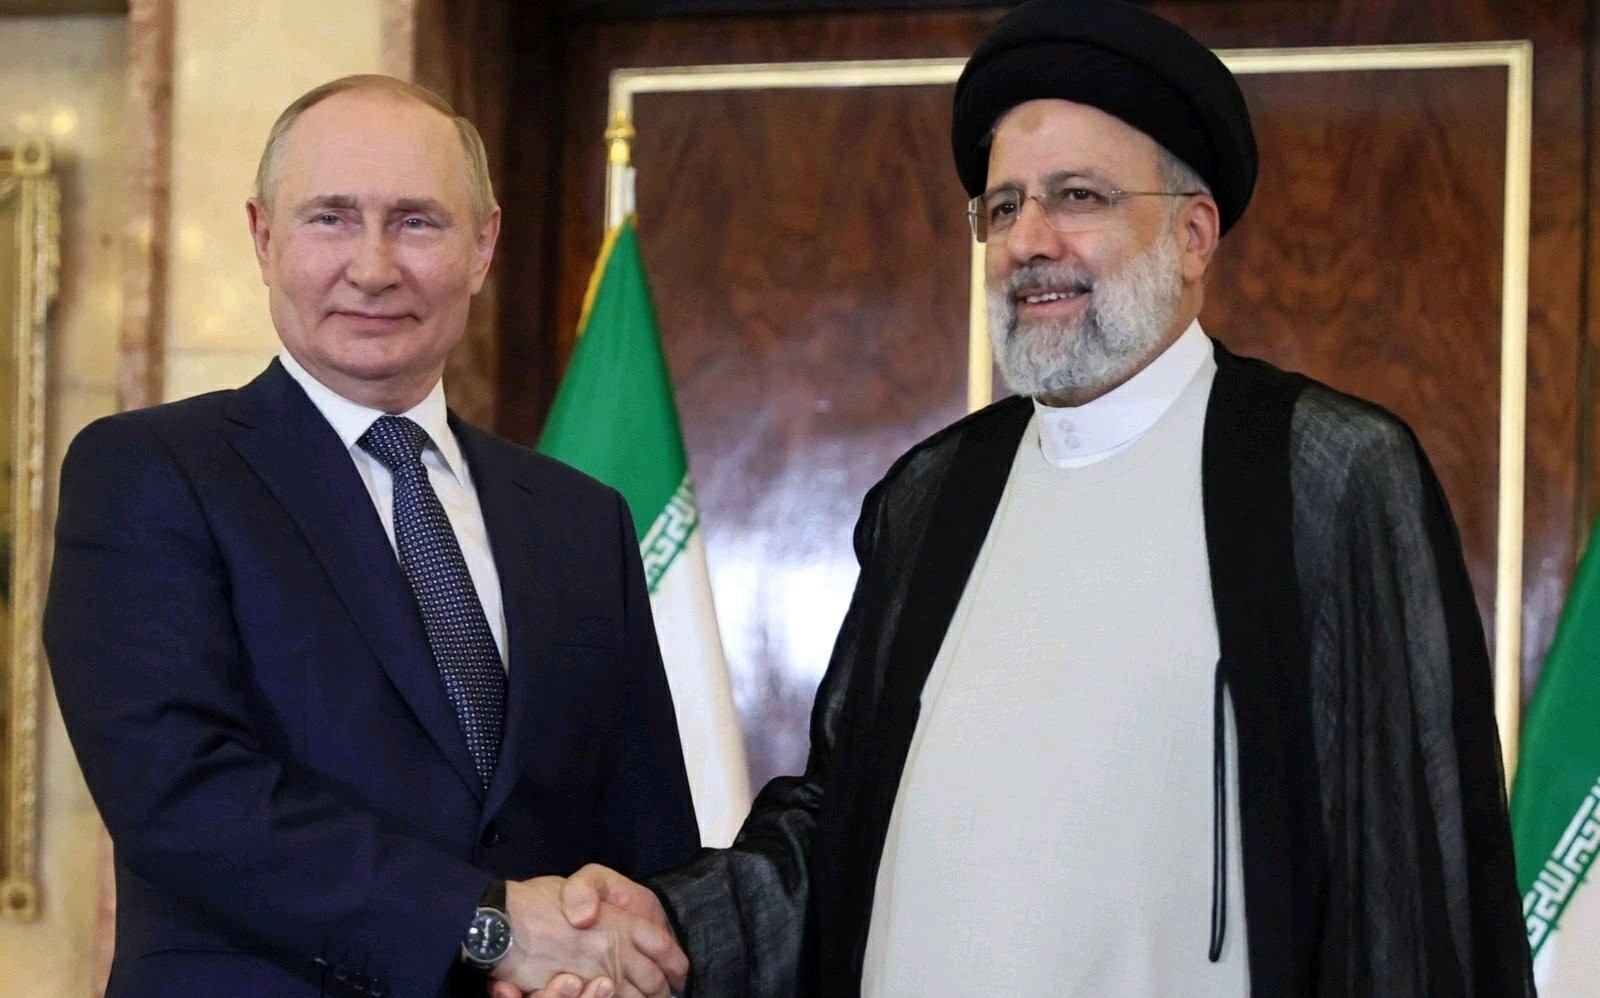 Putin is scheduled to visit Iran accompanied by four Sukhoi 35 planes and strict security protocols.